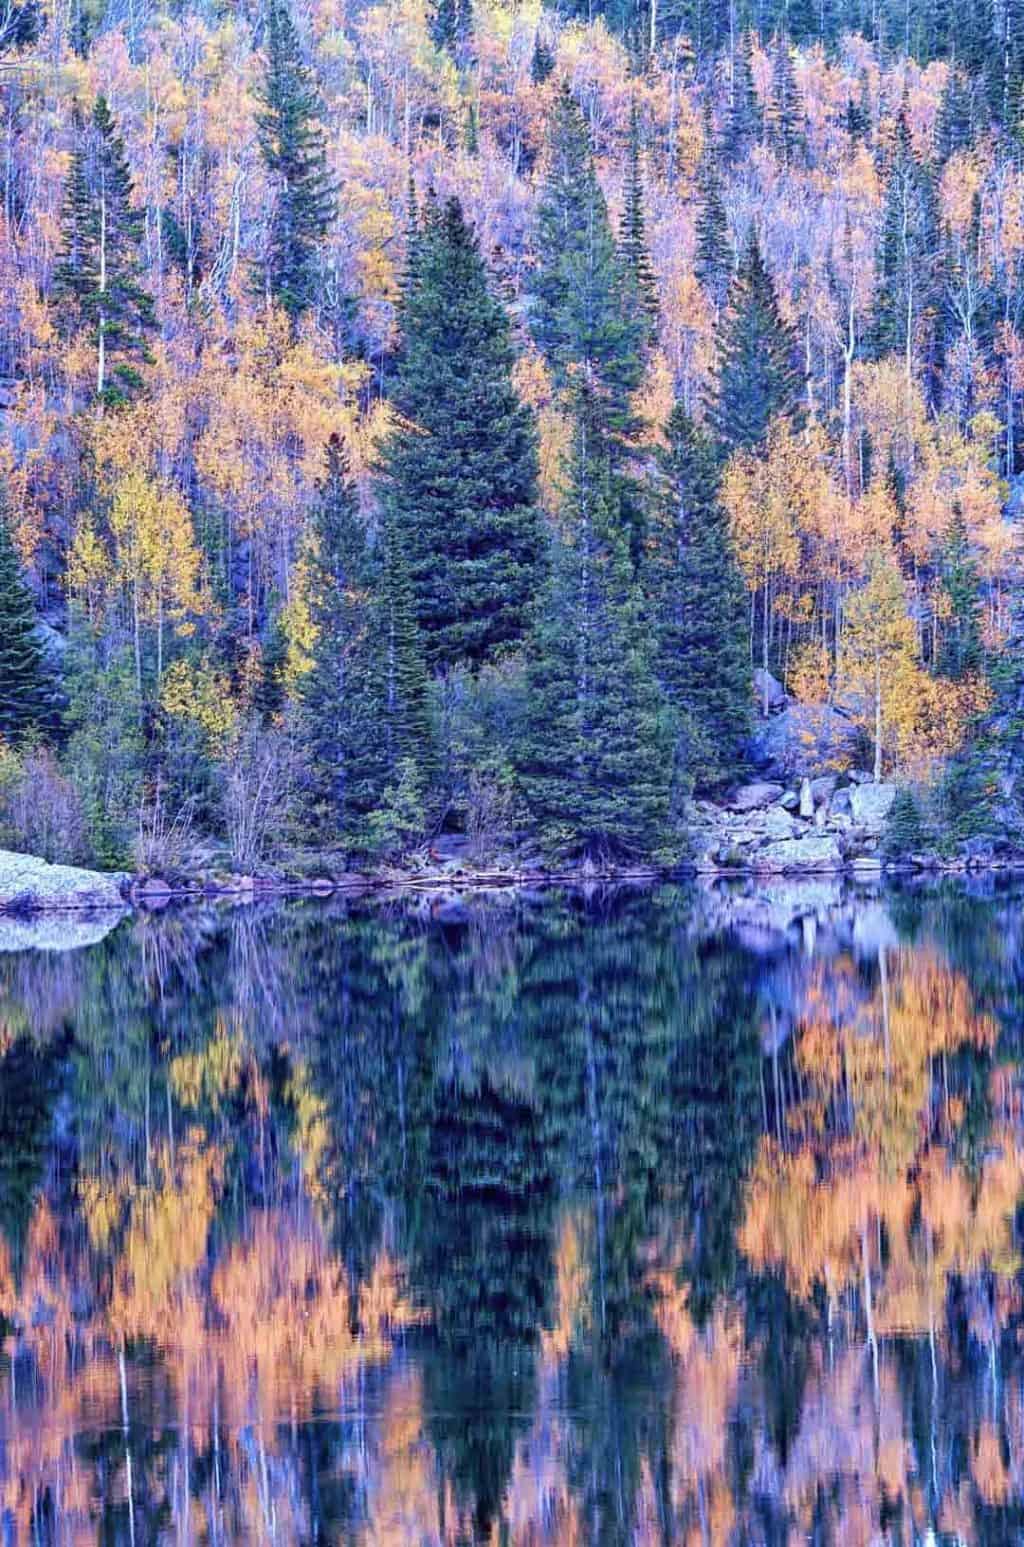 Colorful autumn mixture of yellow and orange aspens and tall pines is reflected in the still water of Bear Lake in Rocky Mountain National Park on an overcast late September afternoon.